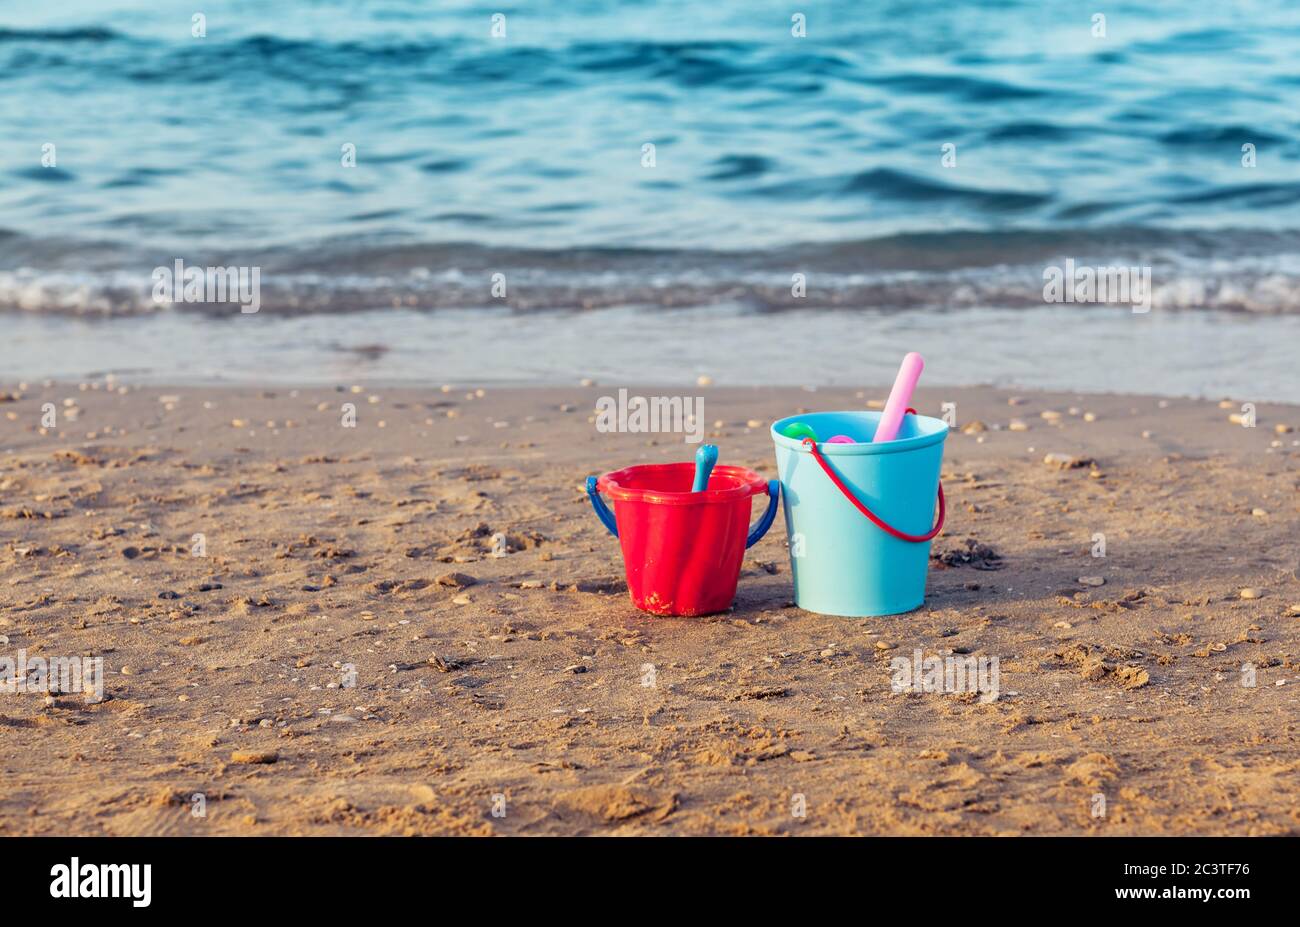 Child's bucket, spade and other toys in the sand on empty beach Stock Photo